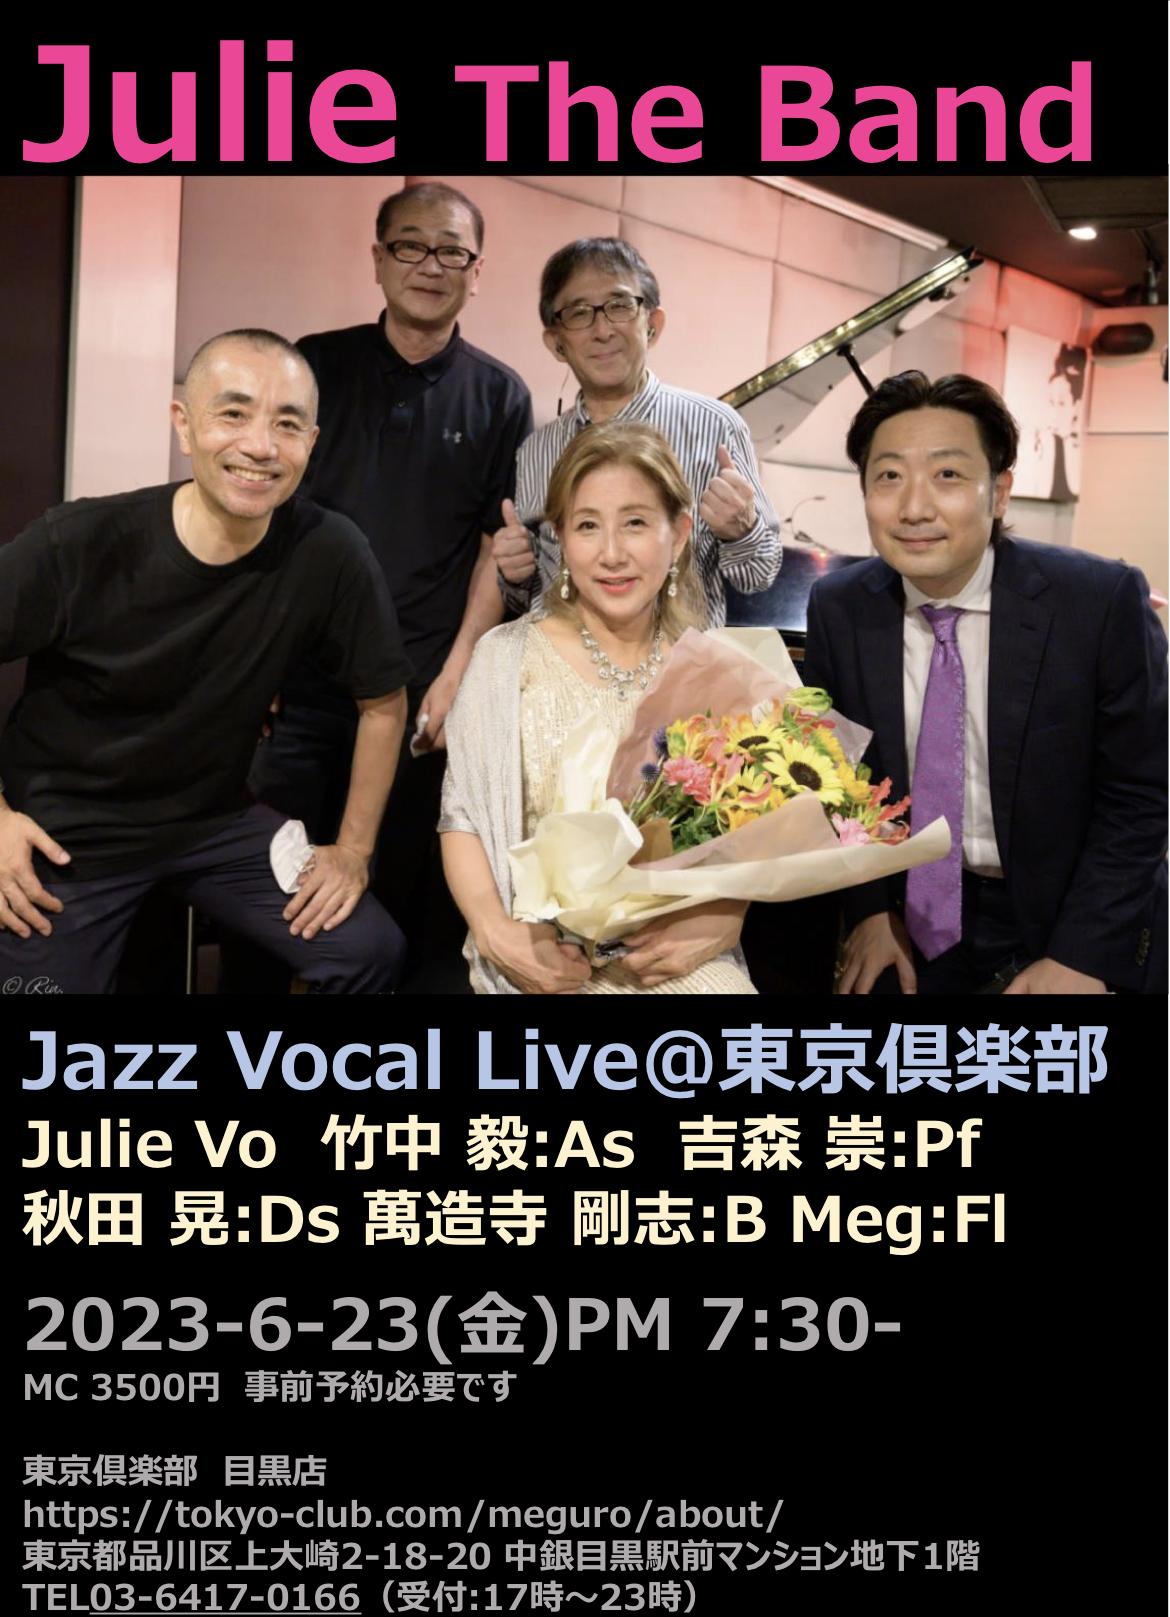 Julie and The band